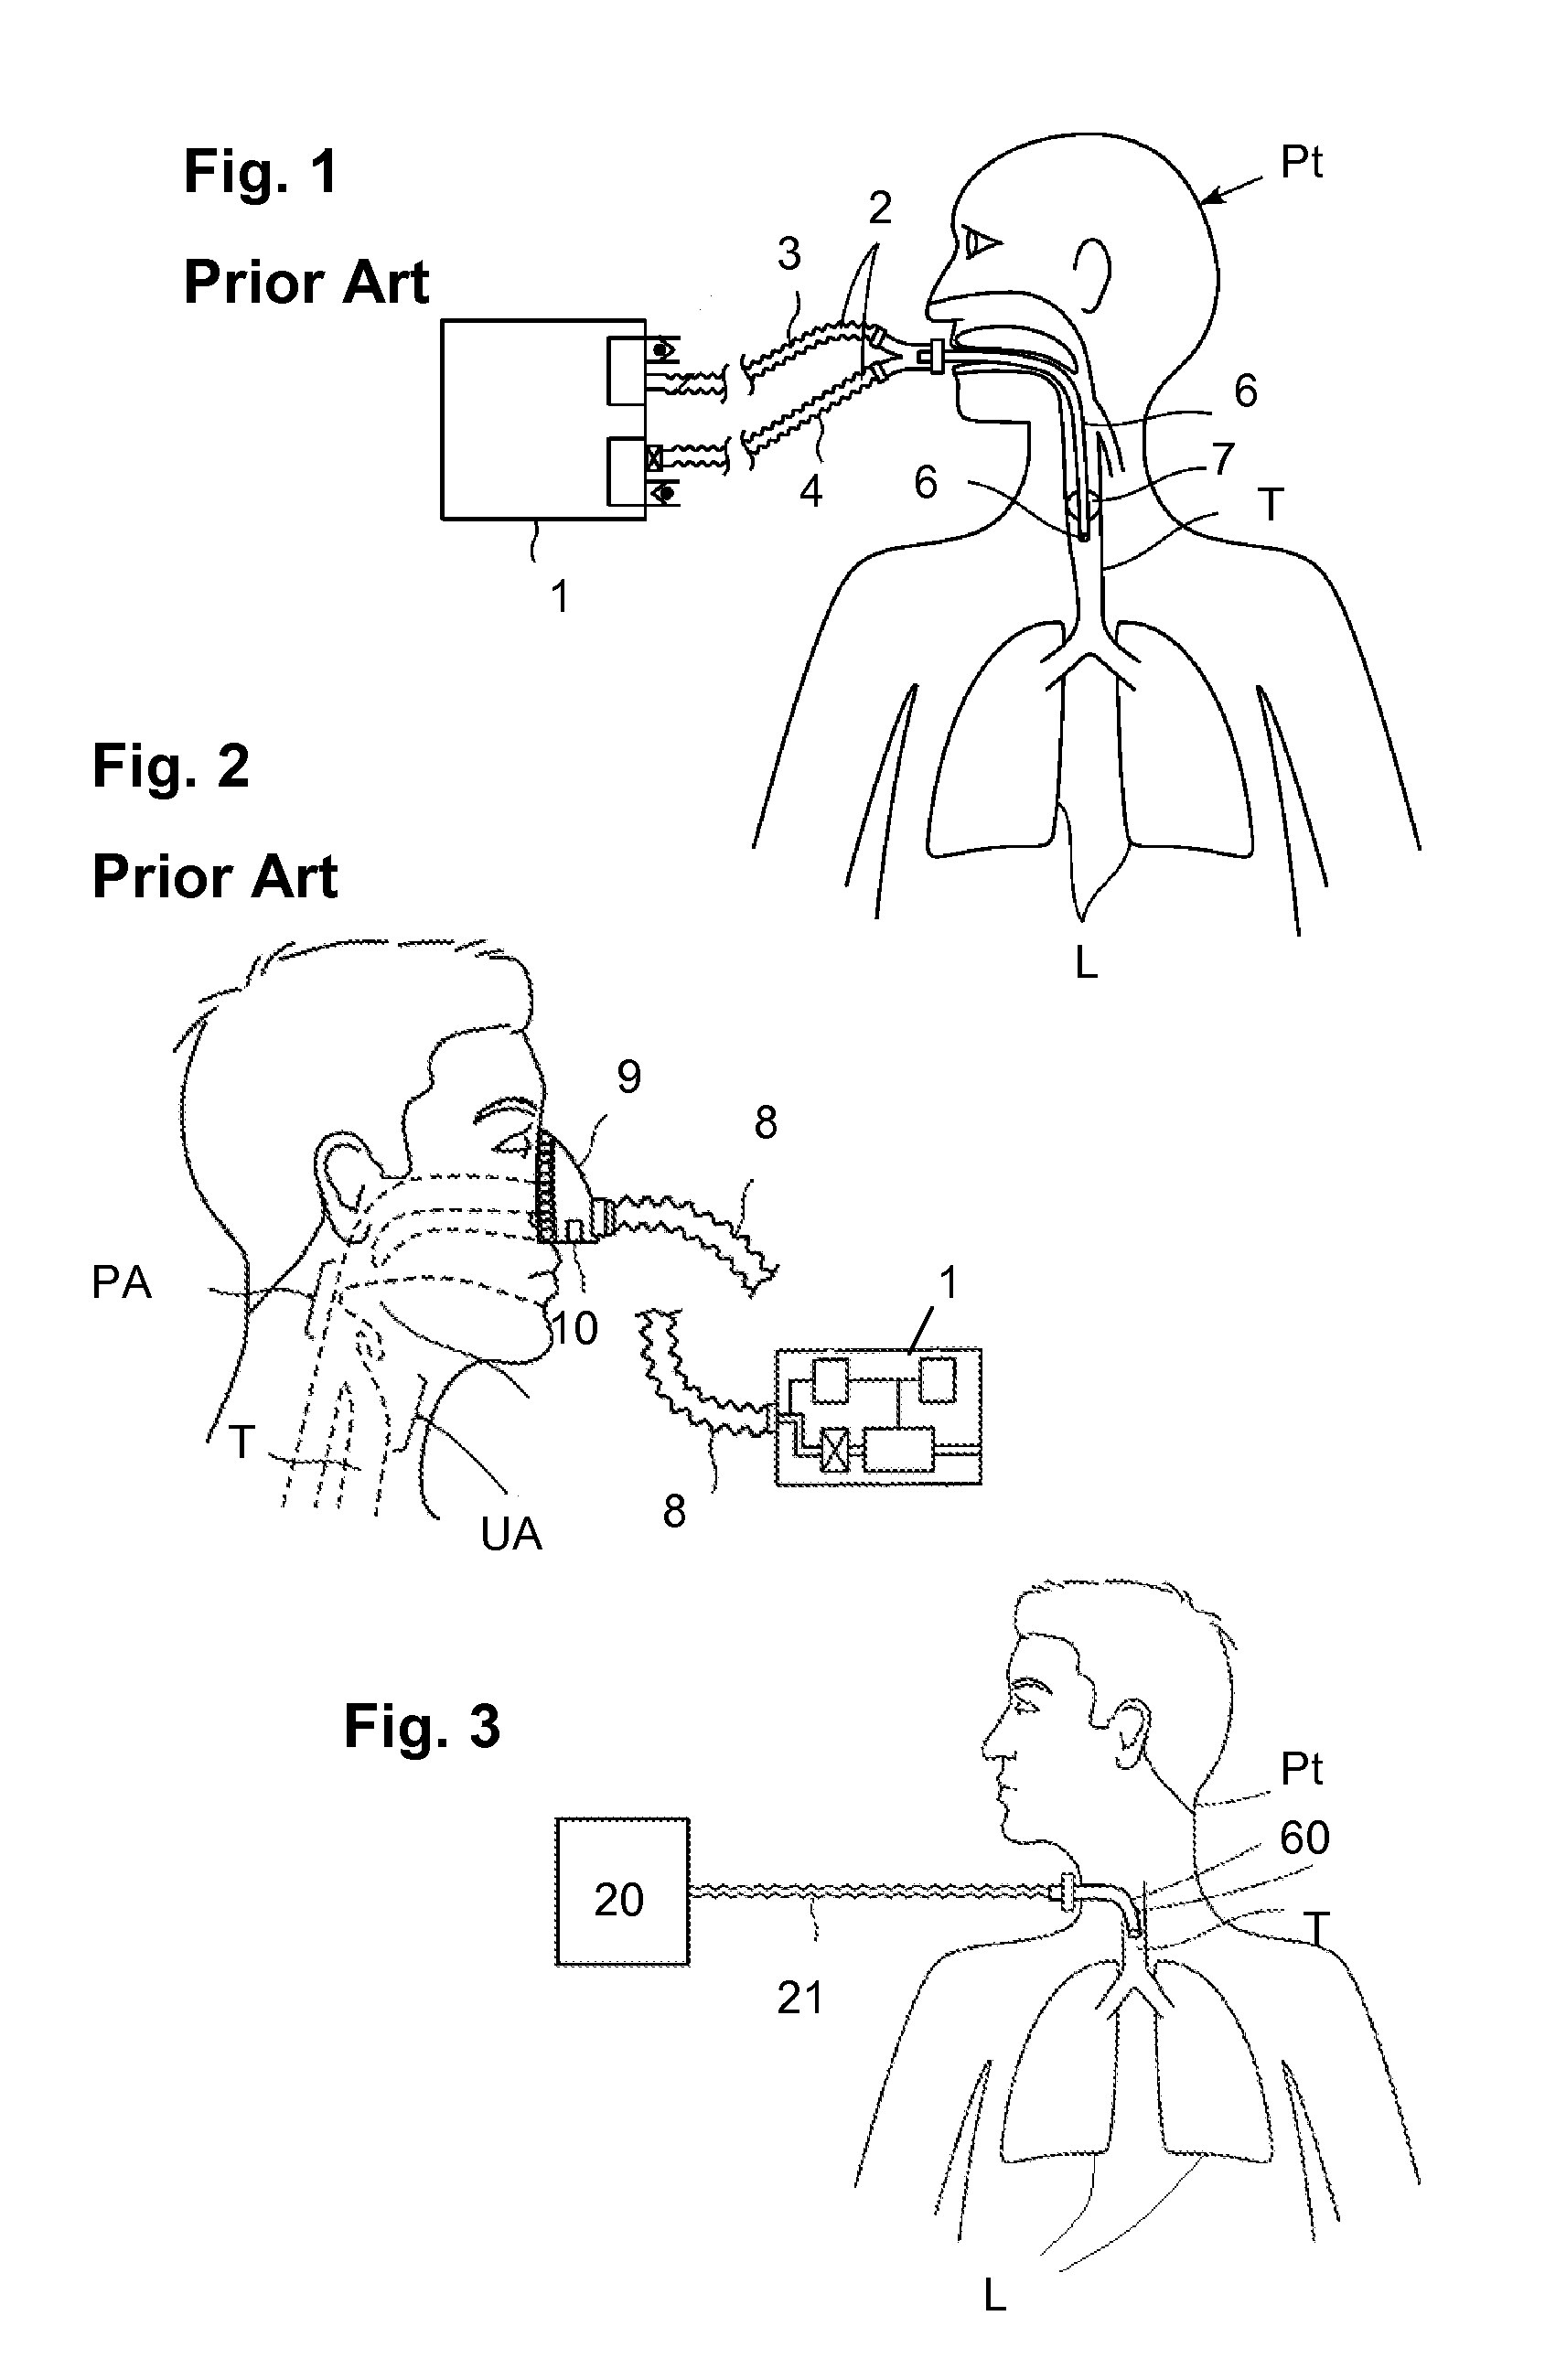 Methods and devices for providing mechanical ventilation with an open airway interface